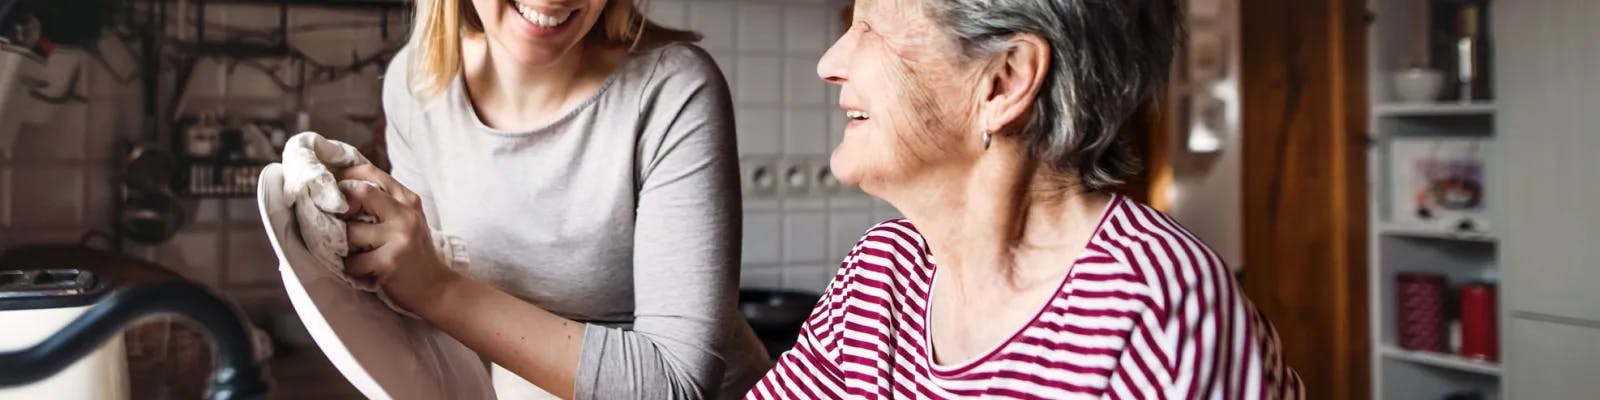 Adult daughter and elderly woman in kitchen smiling